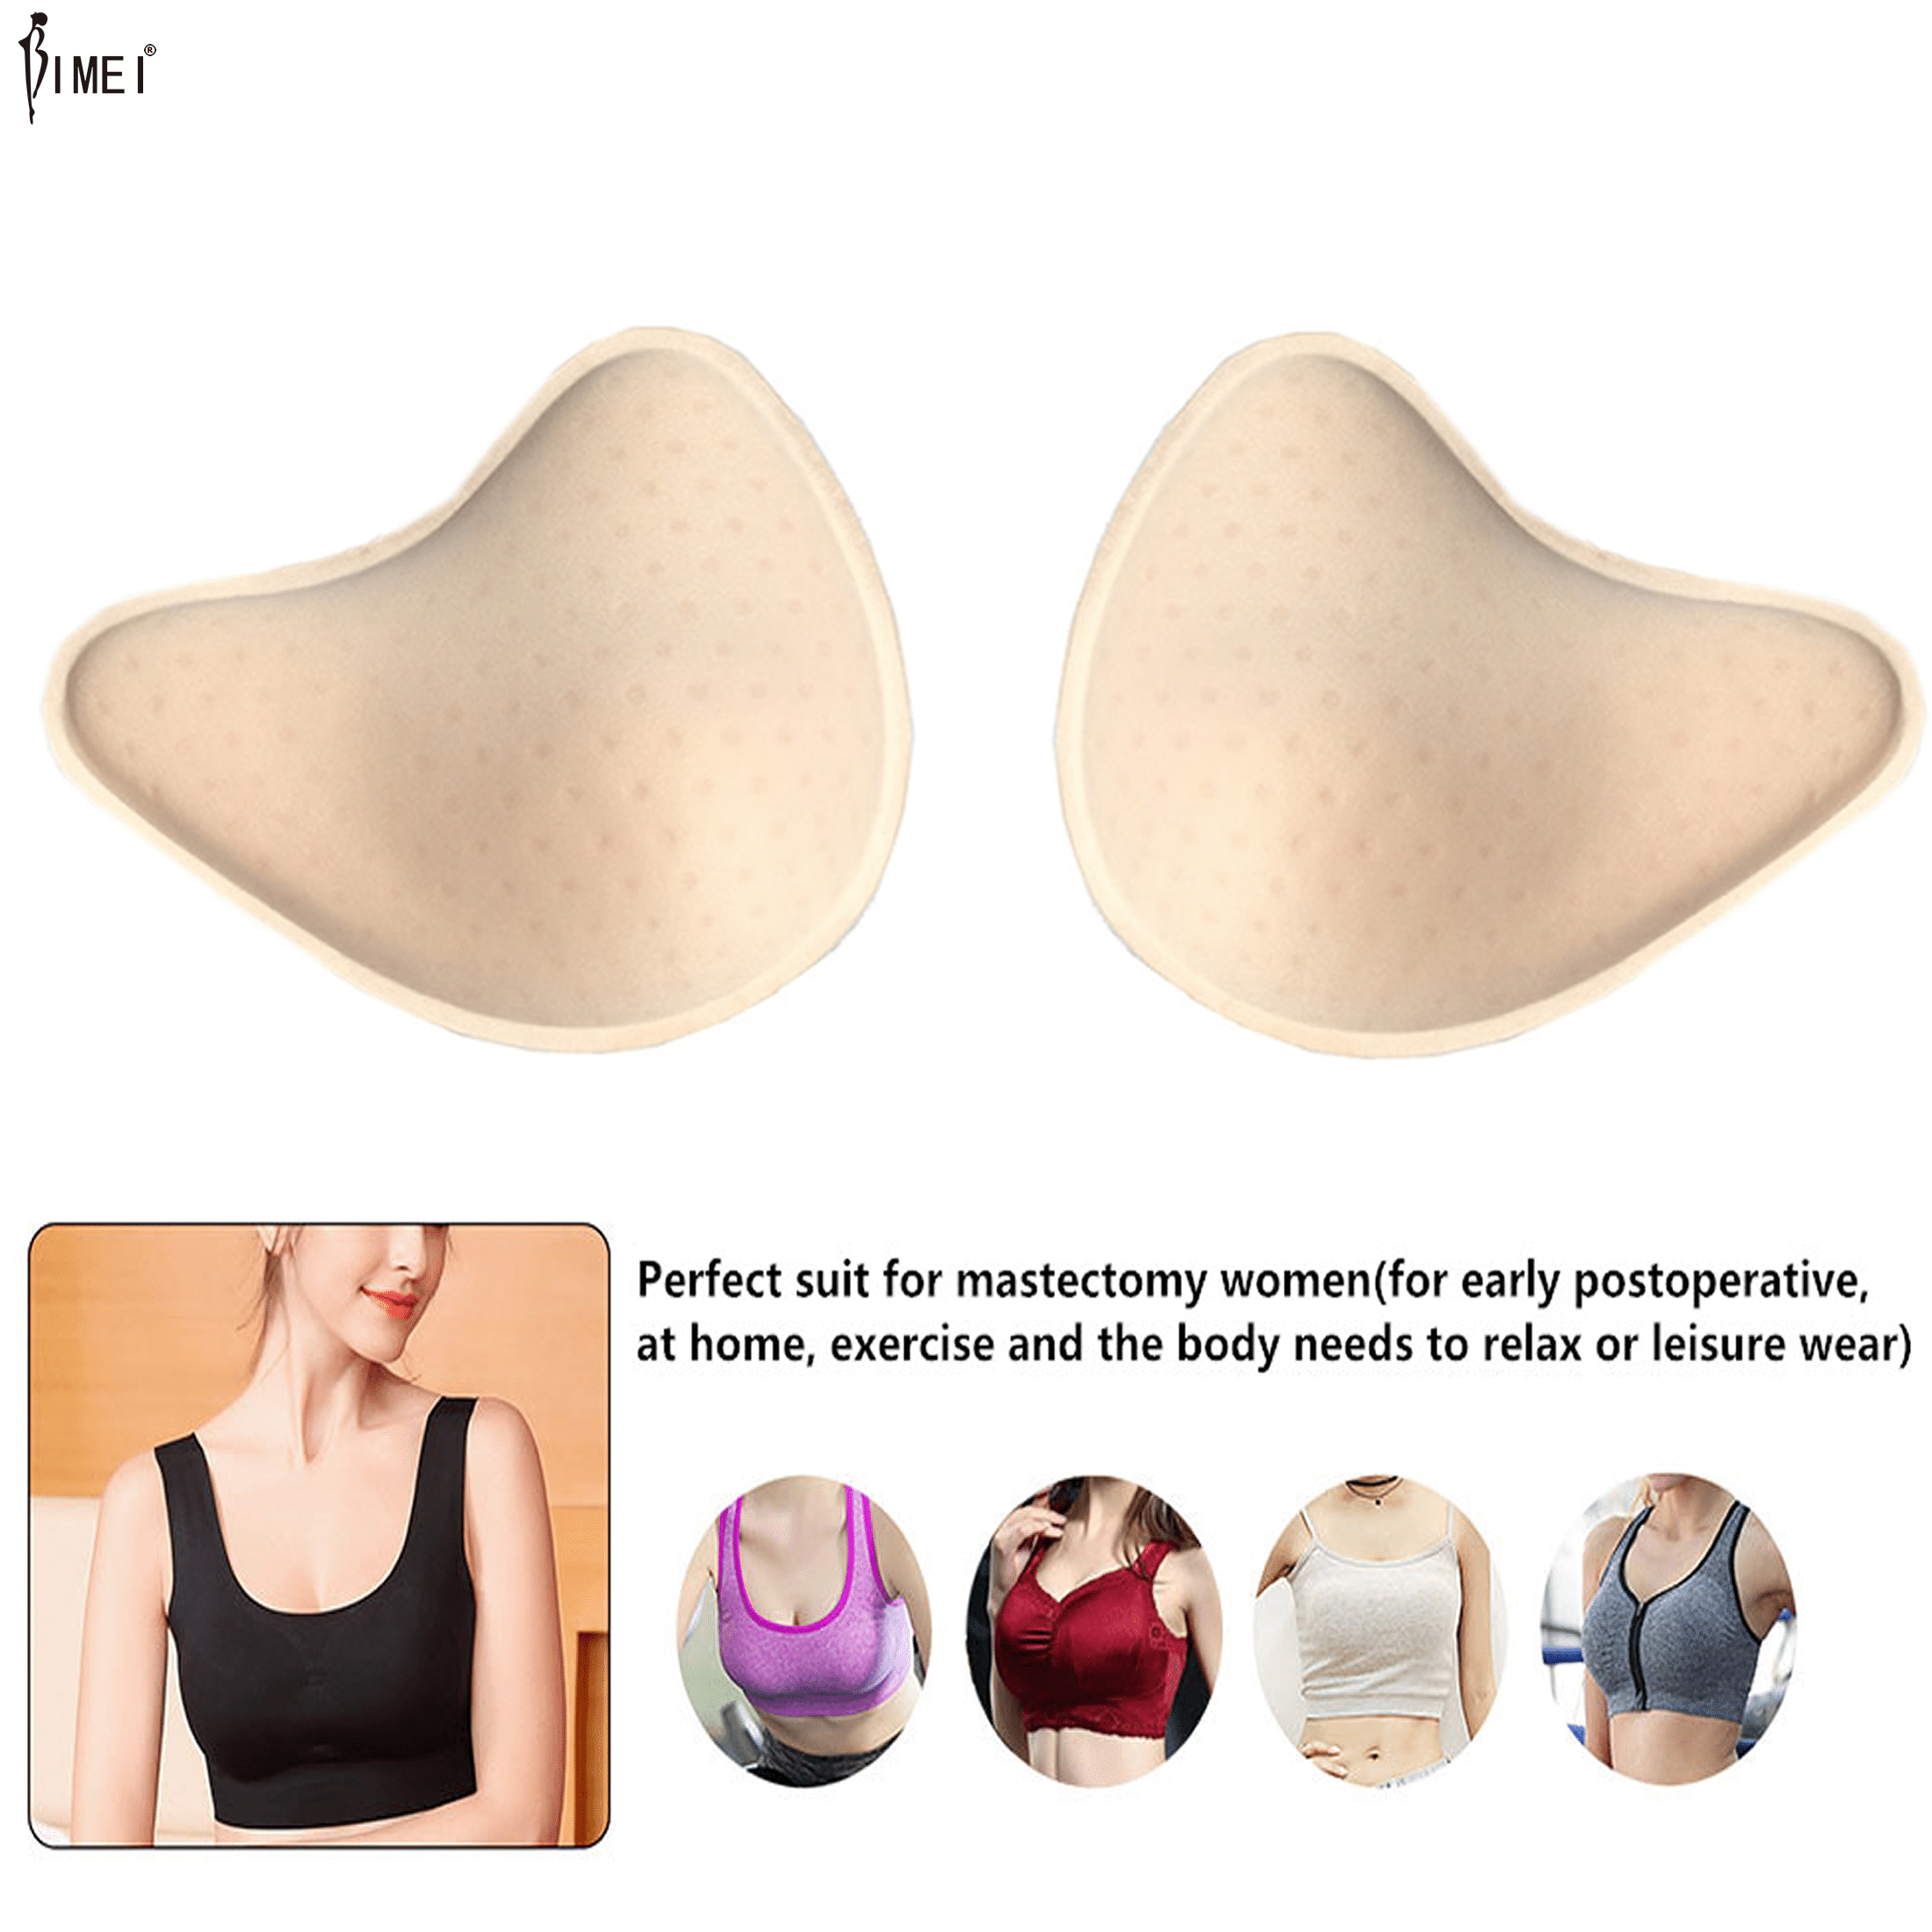 Womens Sponge Bra Inserts Replacement Pads for Swimsuits Workouts Mastectomy